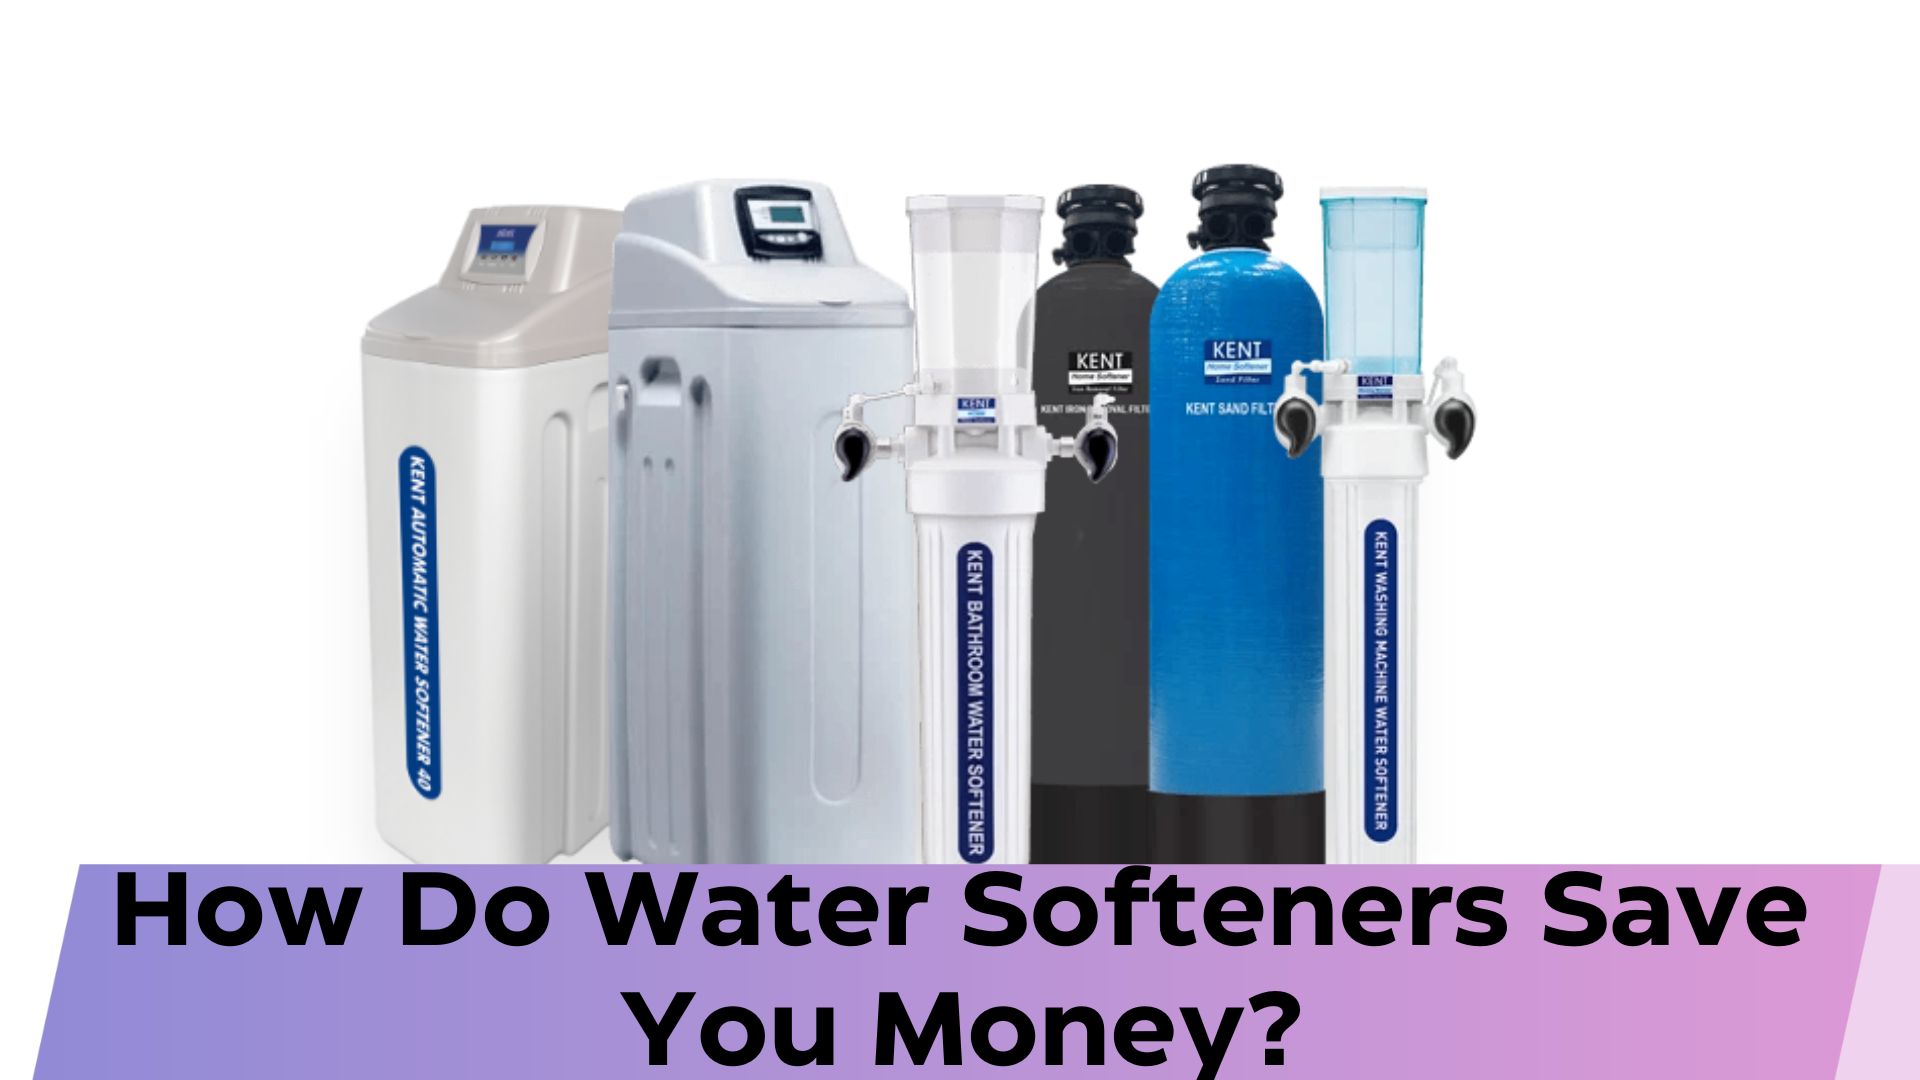 How Do Water Softeners Save You Money?